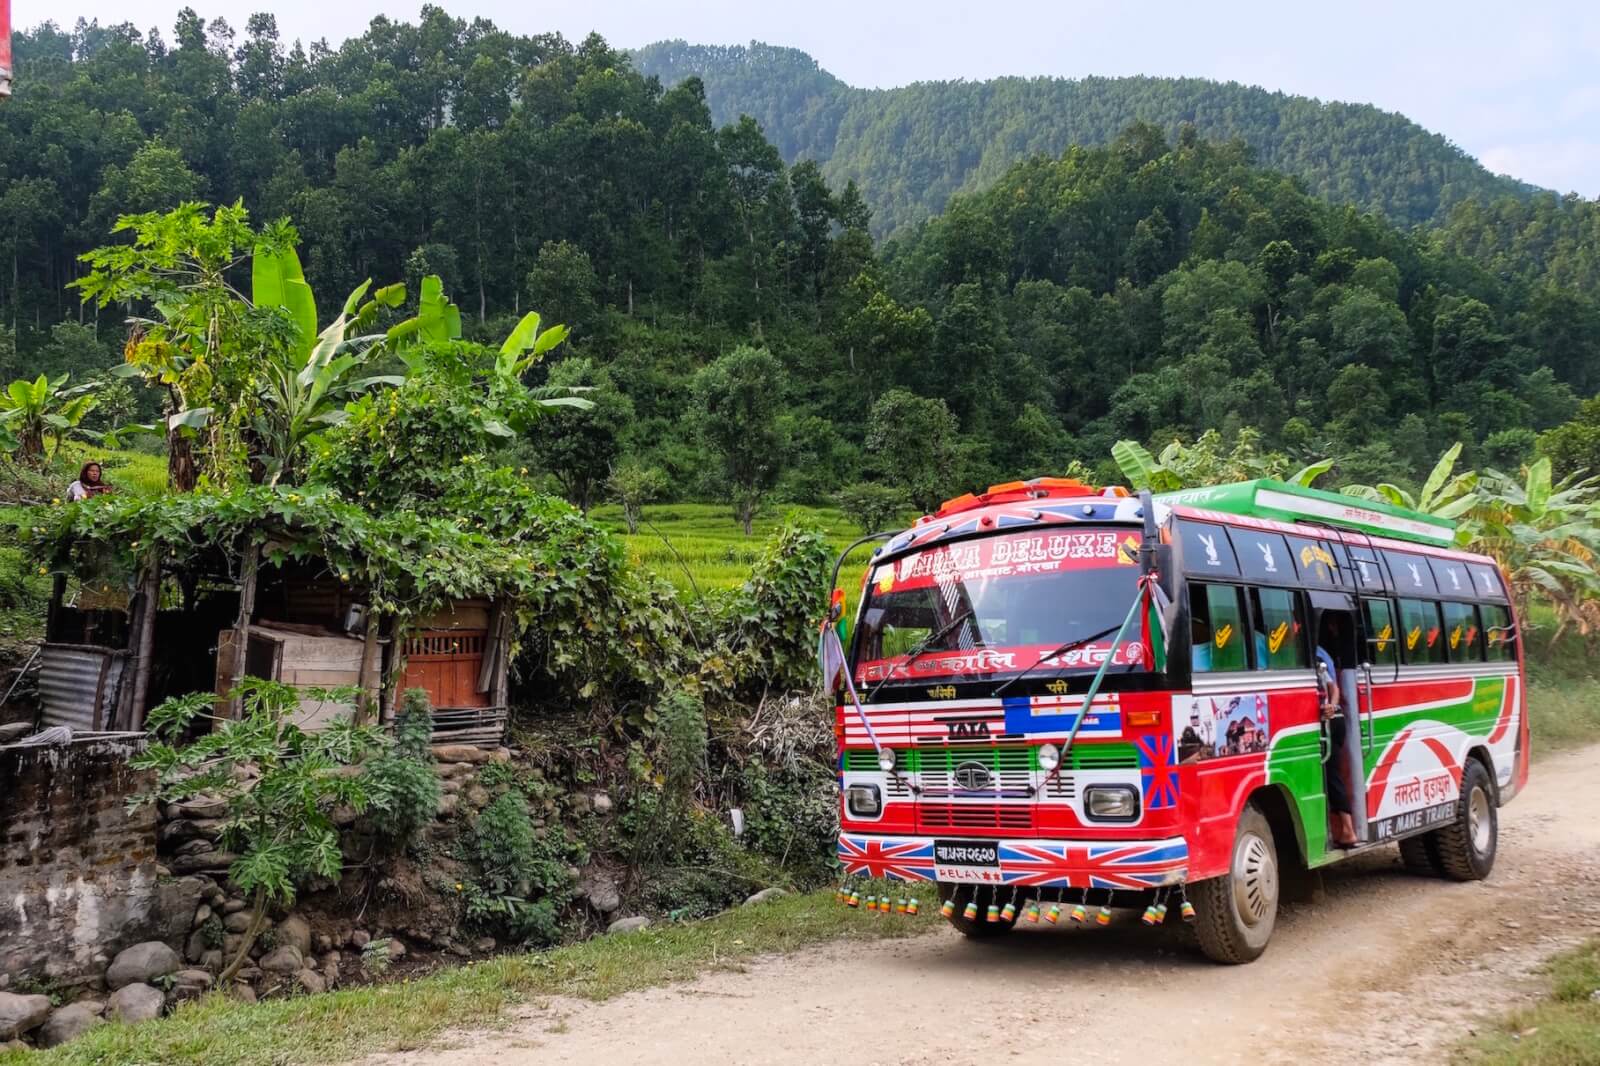 A colourful public bus in Nepal